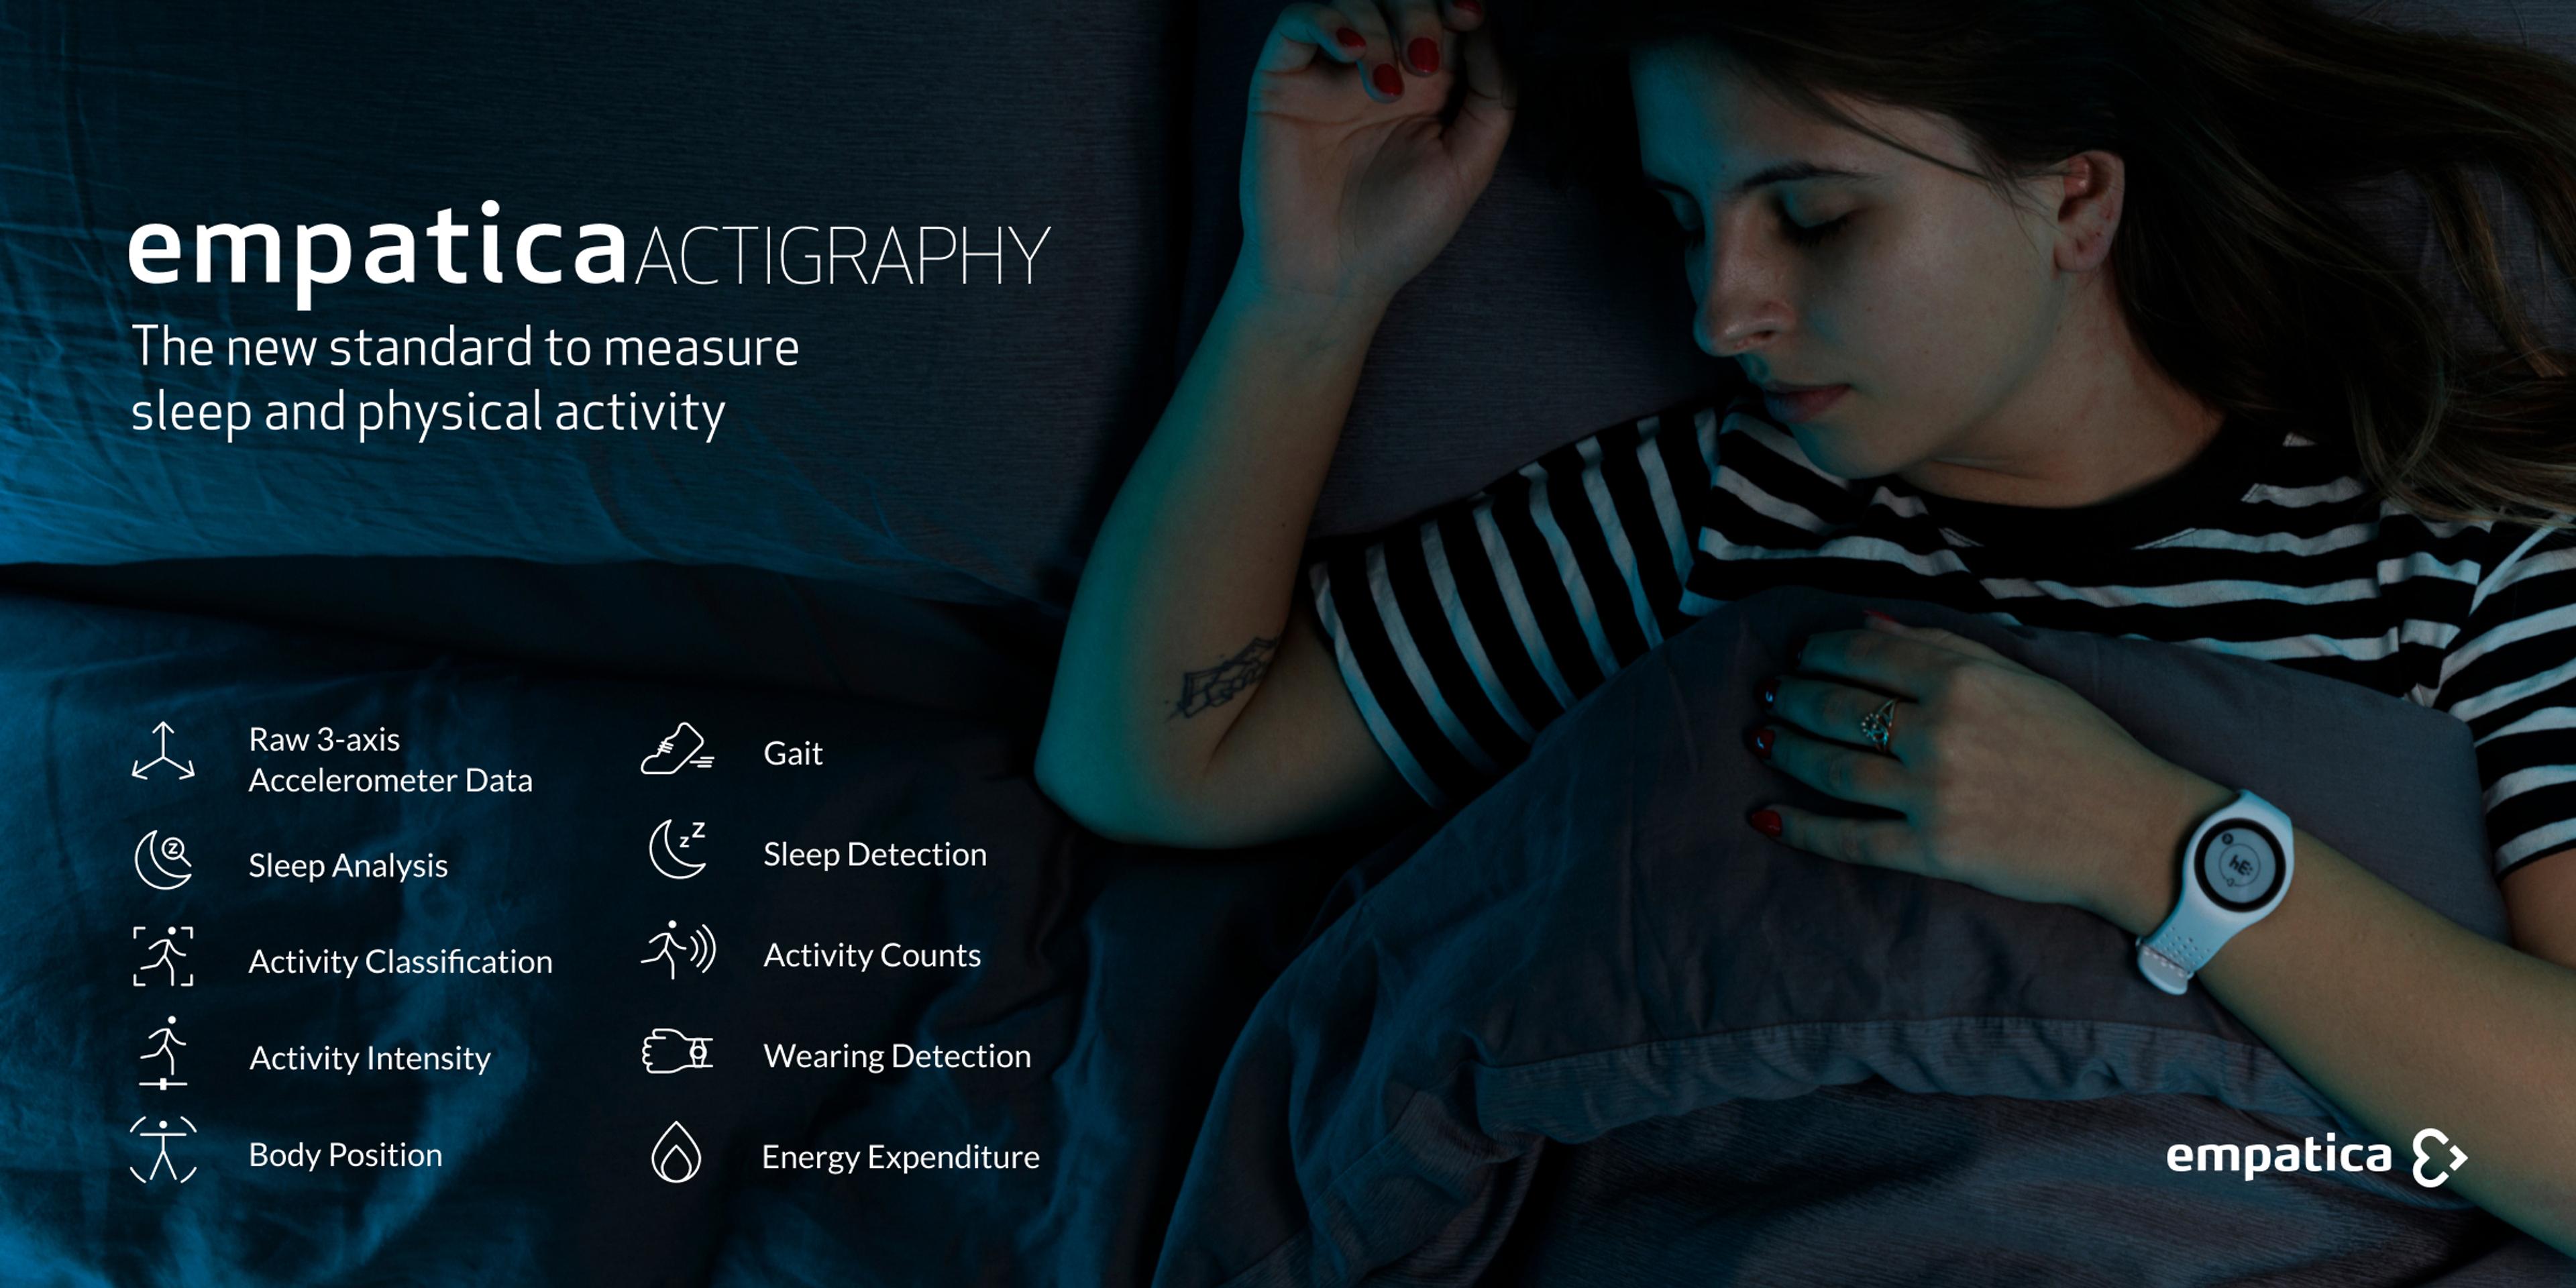 Over 20 sleep and activity digital biomarkers